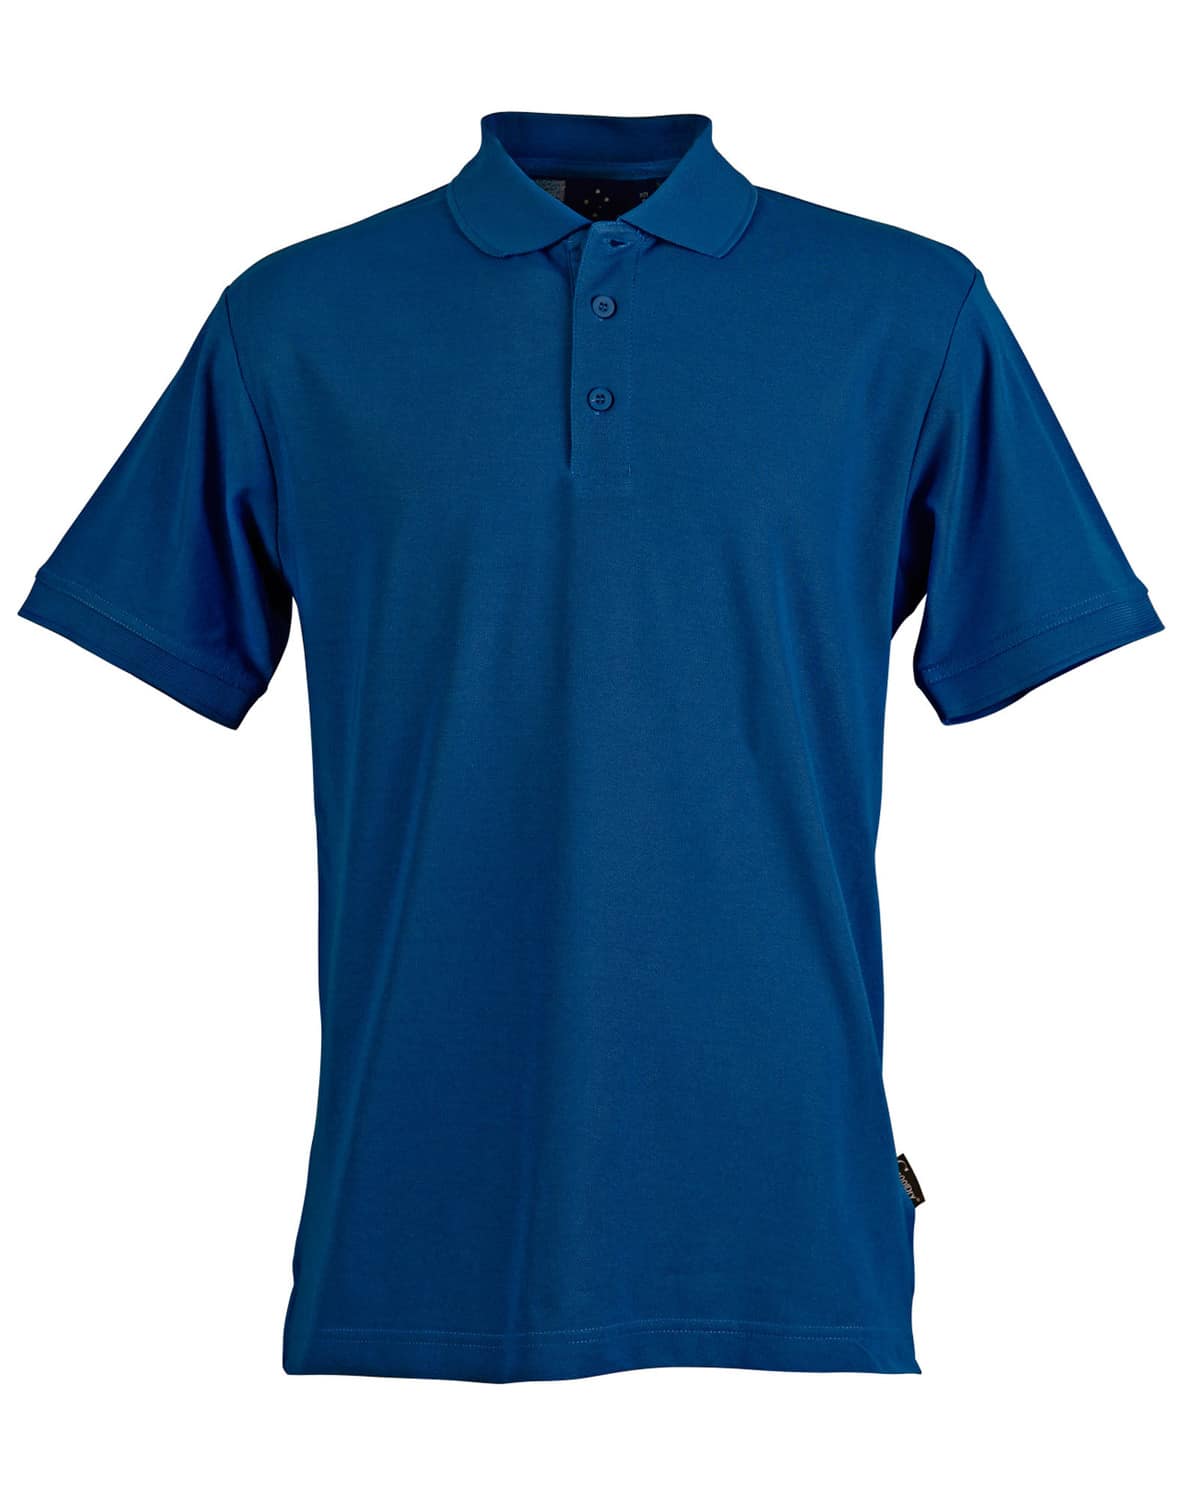 Cobalt Blue The Solid Colour Casual Mens Polo